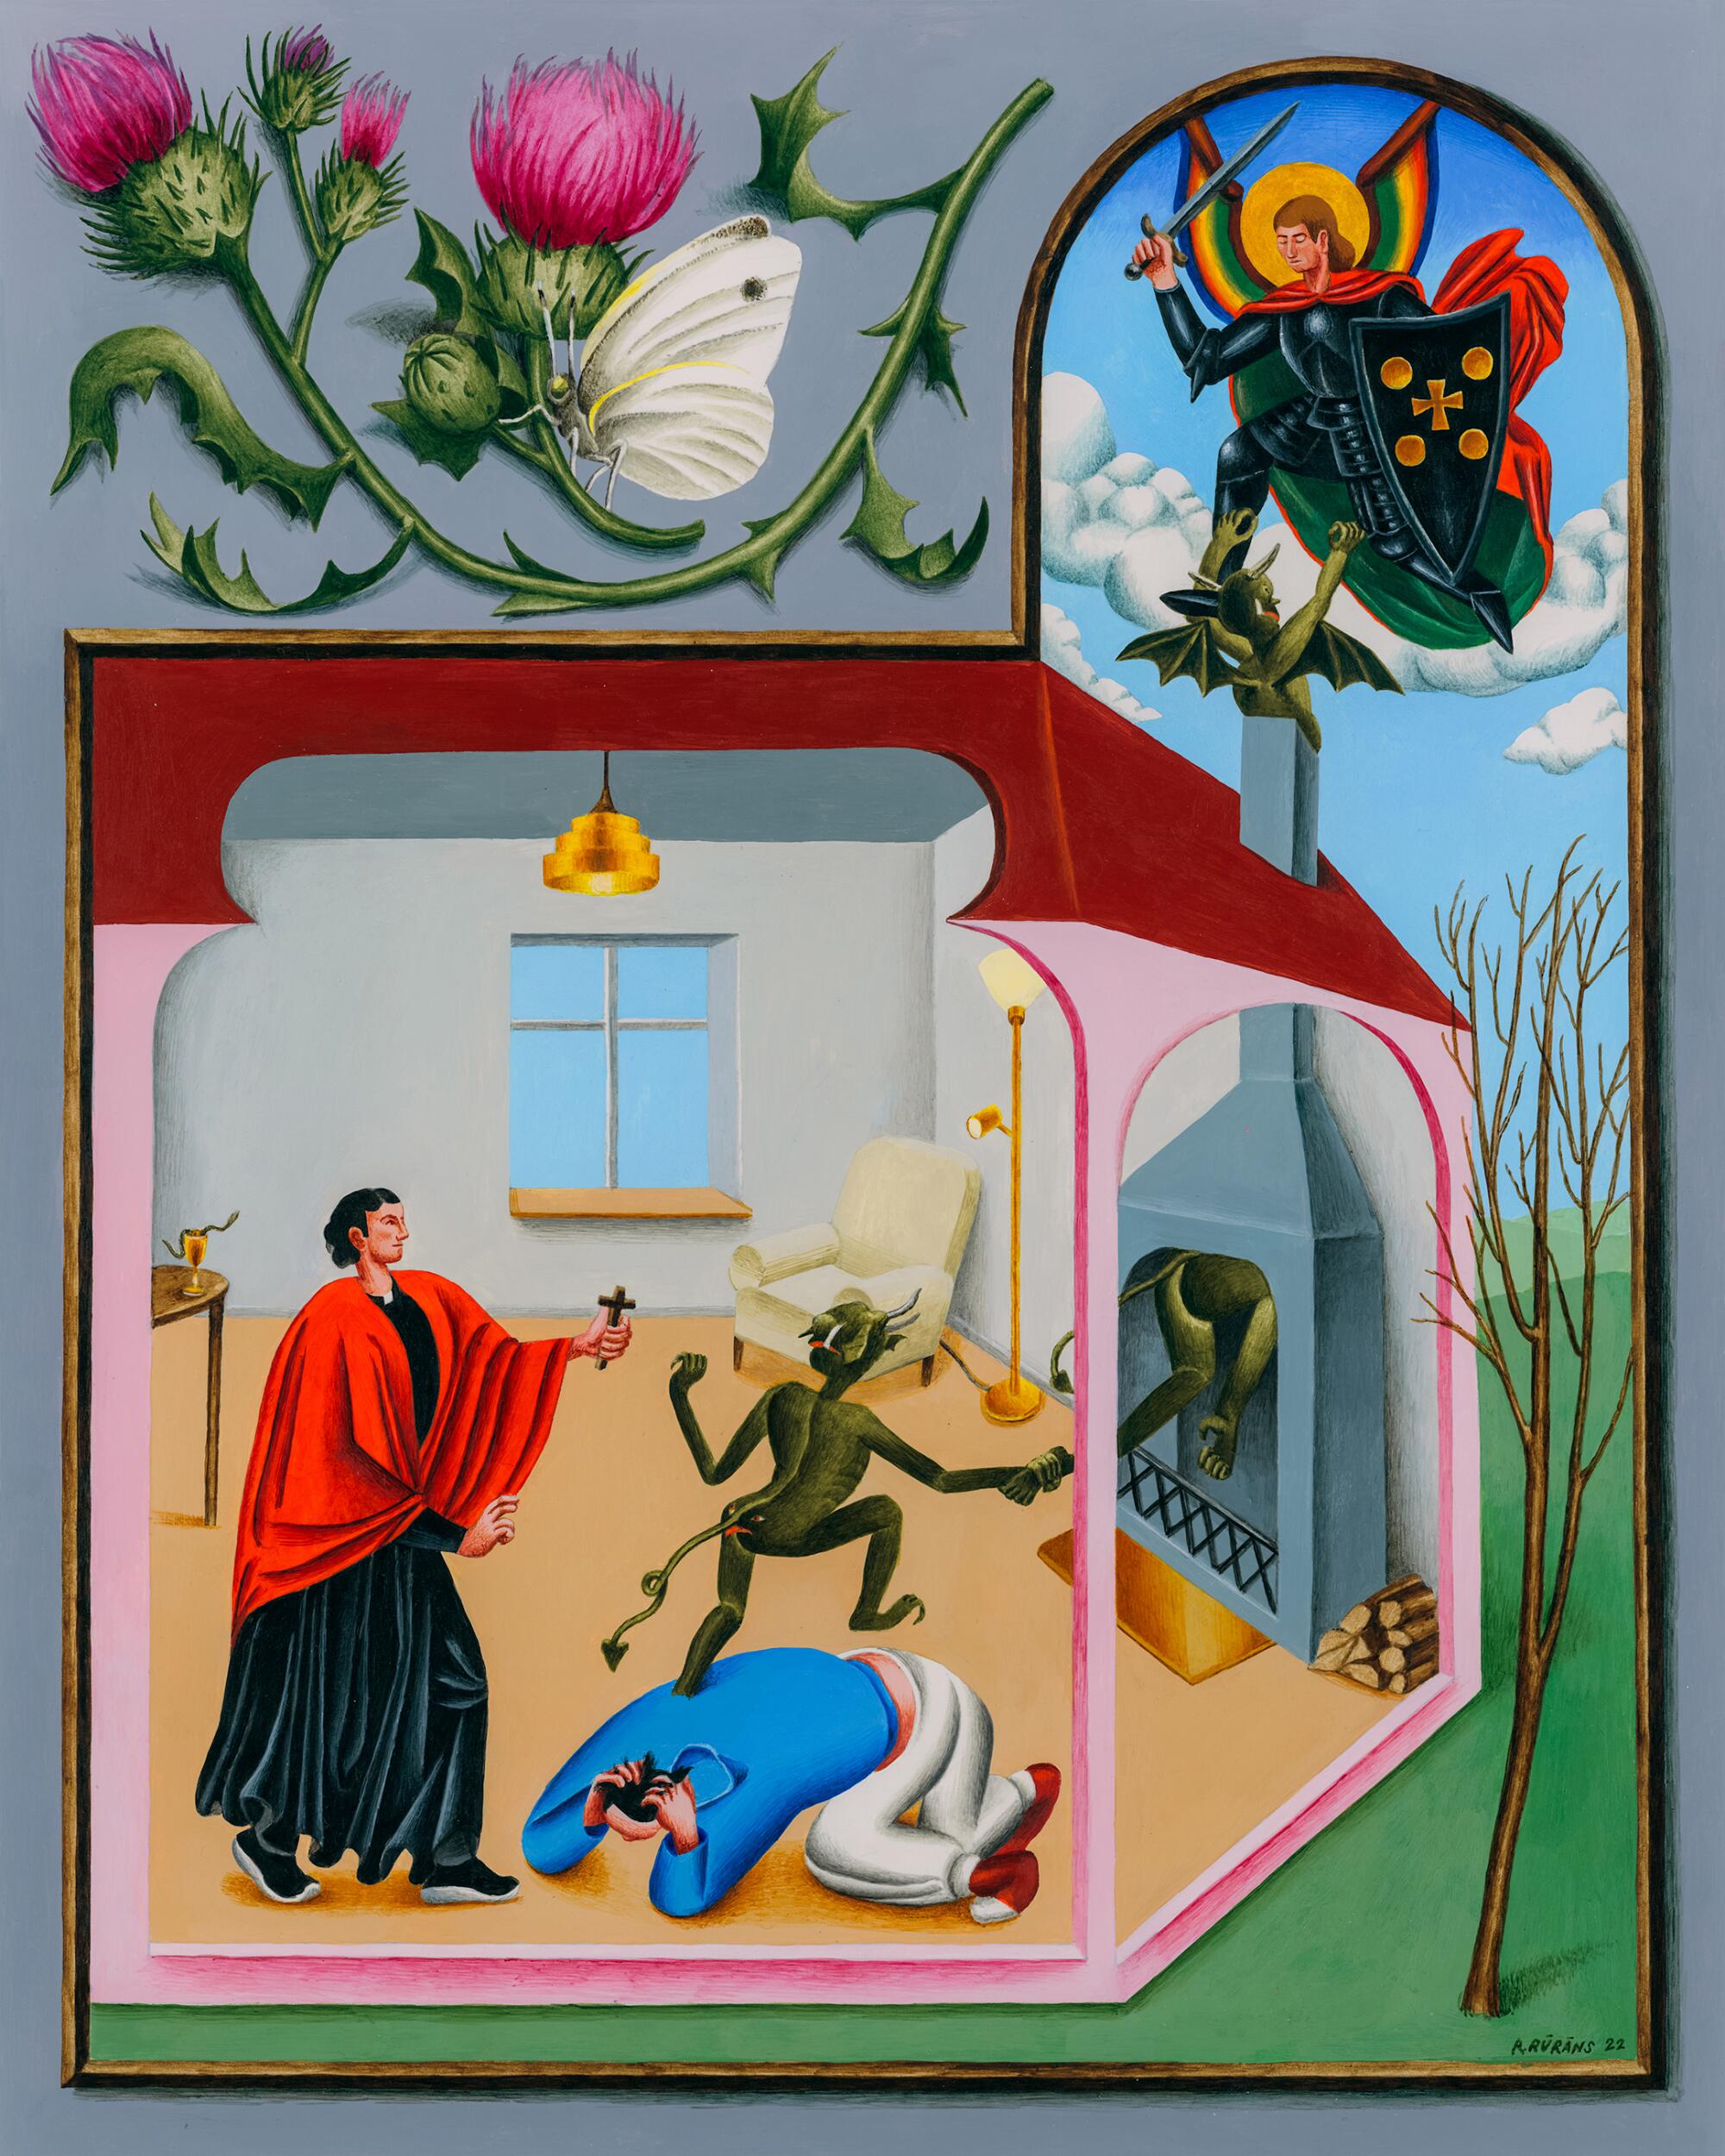 Illustration of a priest exorcising demons from a person cowering on the ground of a modern day living room.